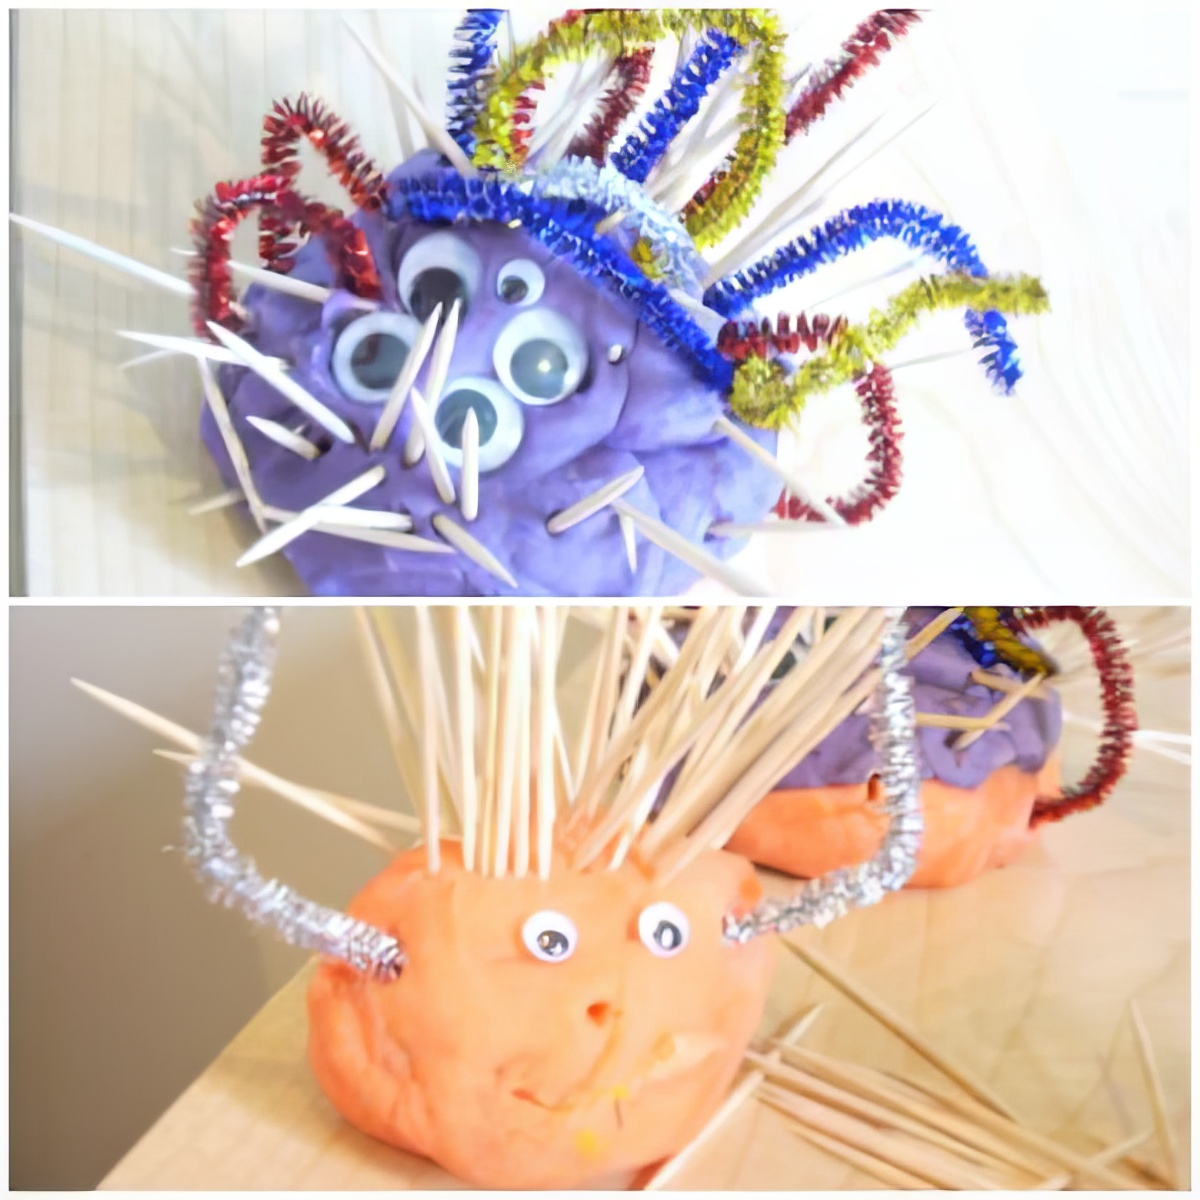 monsters using diy pipe cleaners, tooth picks and other materials from the house